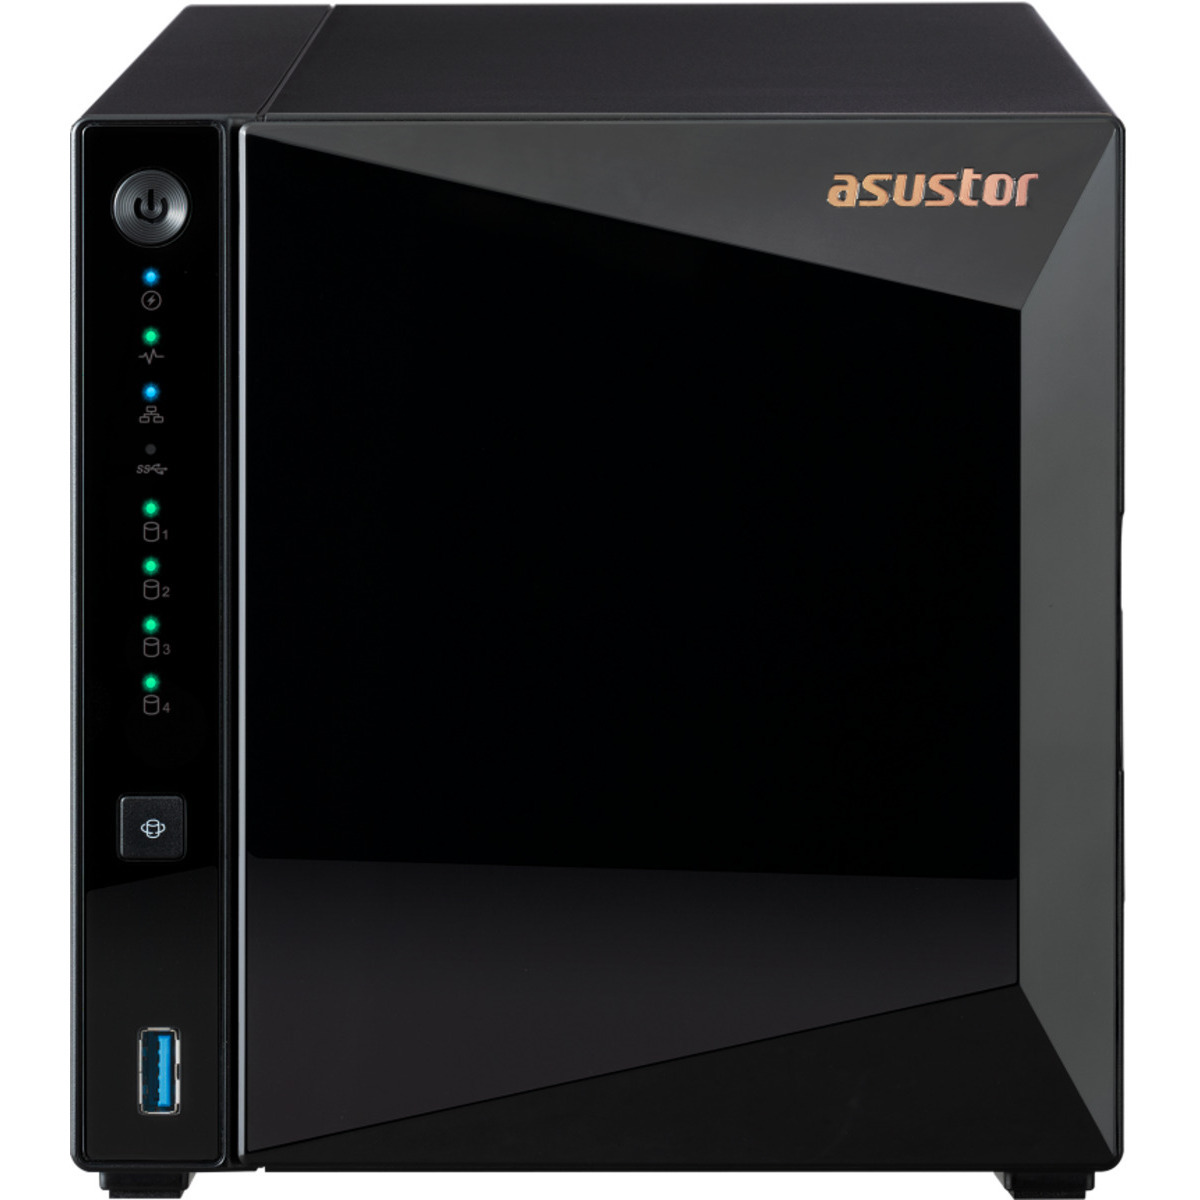 buy $1348 ASUSTOR DRIVESTOR 4 Pro AS3304T 64tb Desktop NAS - Network Attached Storage Device 4x16000gb Seagate EXOS X18 ST16000NM000J 3.5 7200rpm SATA 6Gb/s HDD ENTERPRISE Class Drives Installed - Burn-In Tested - nas headquarters buy network attached storage server device das new raid-5 free shipping simply usa DRIVESTOR 4 Pro AS3304T